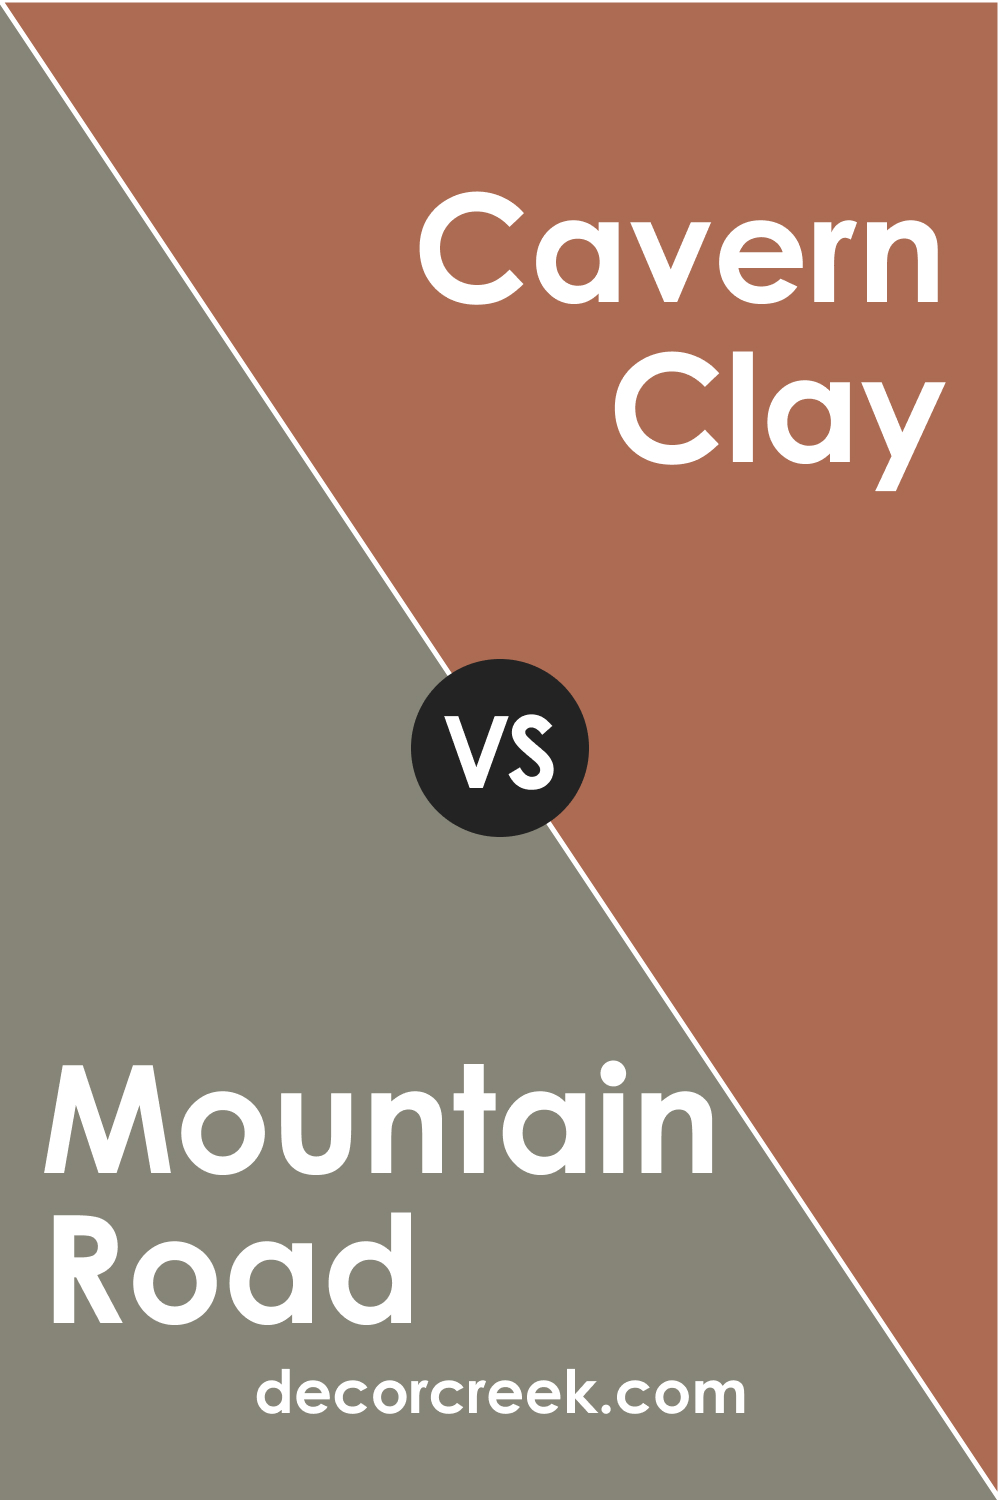 SW 7743 Mountain Road vs. SW Cavern Clay